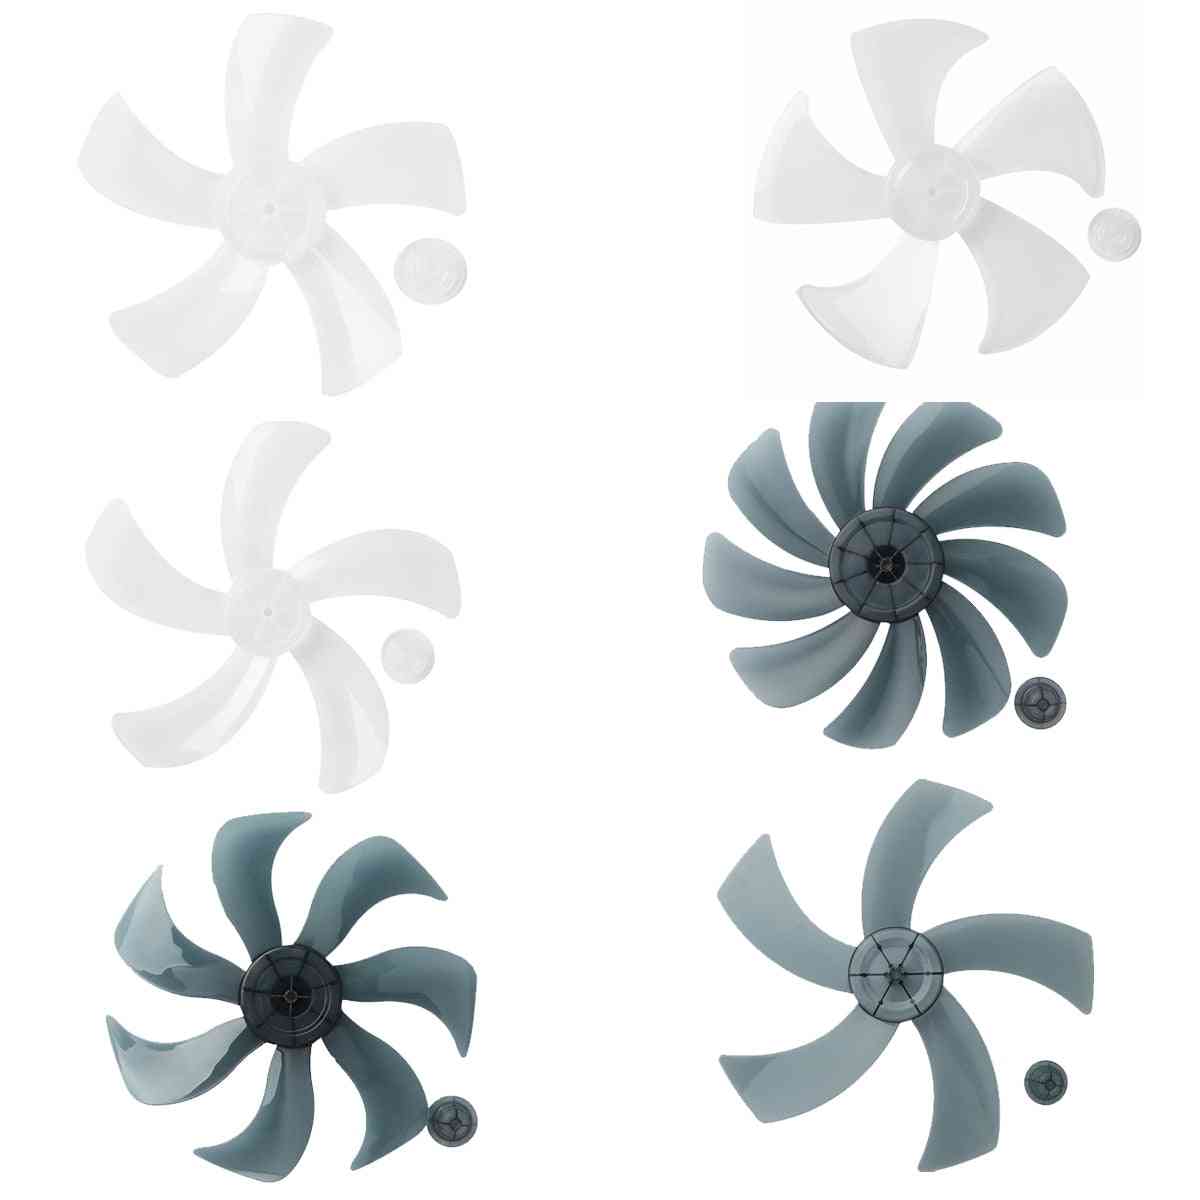 Plastic Fan Blade Leaves With Nut Cover For Standing Pedestal, Table Fanner